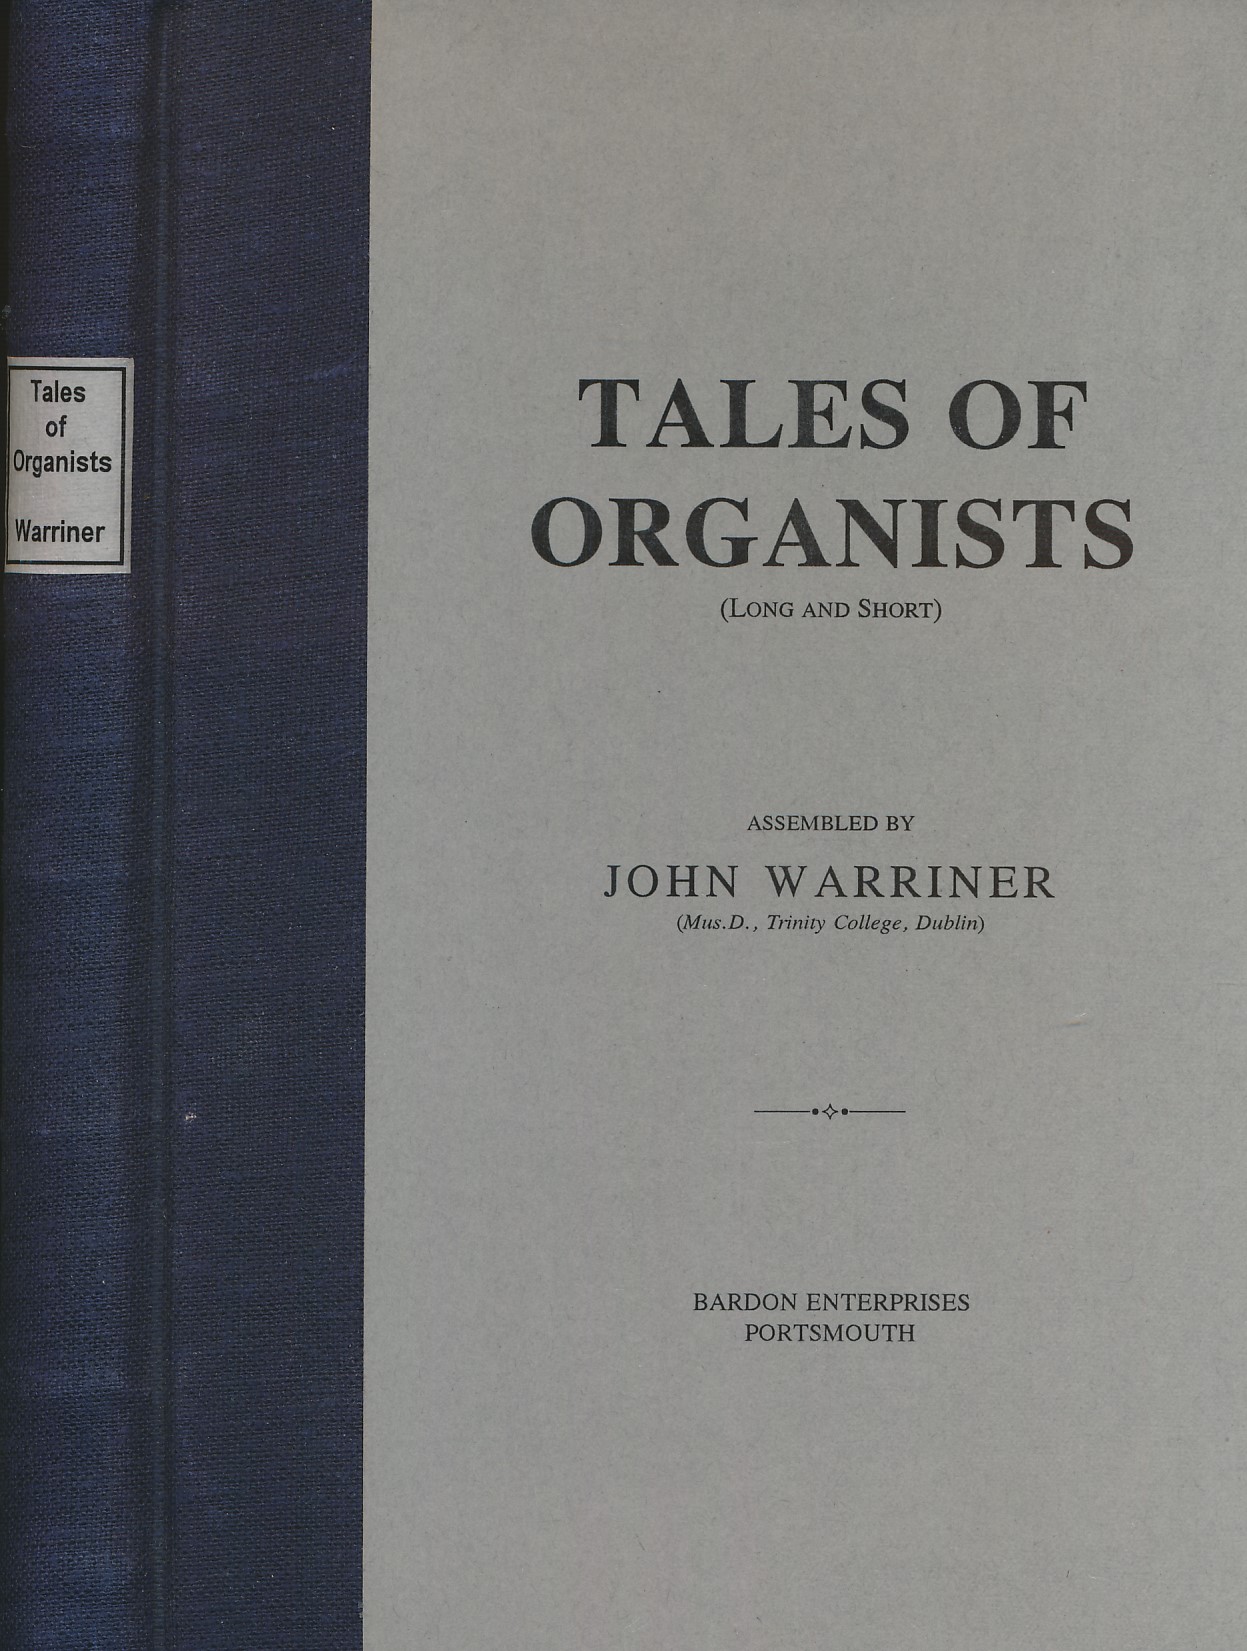 Tales of Organists (Long and Short)